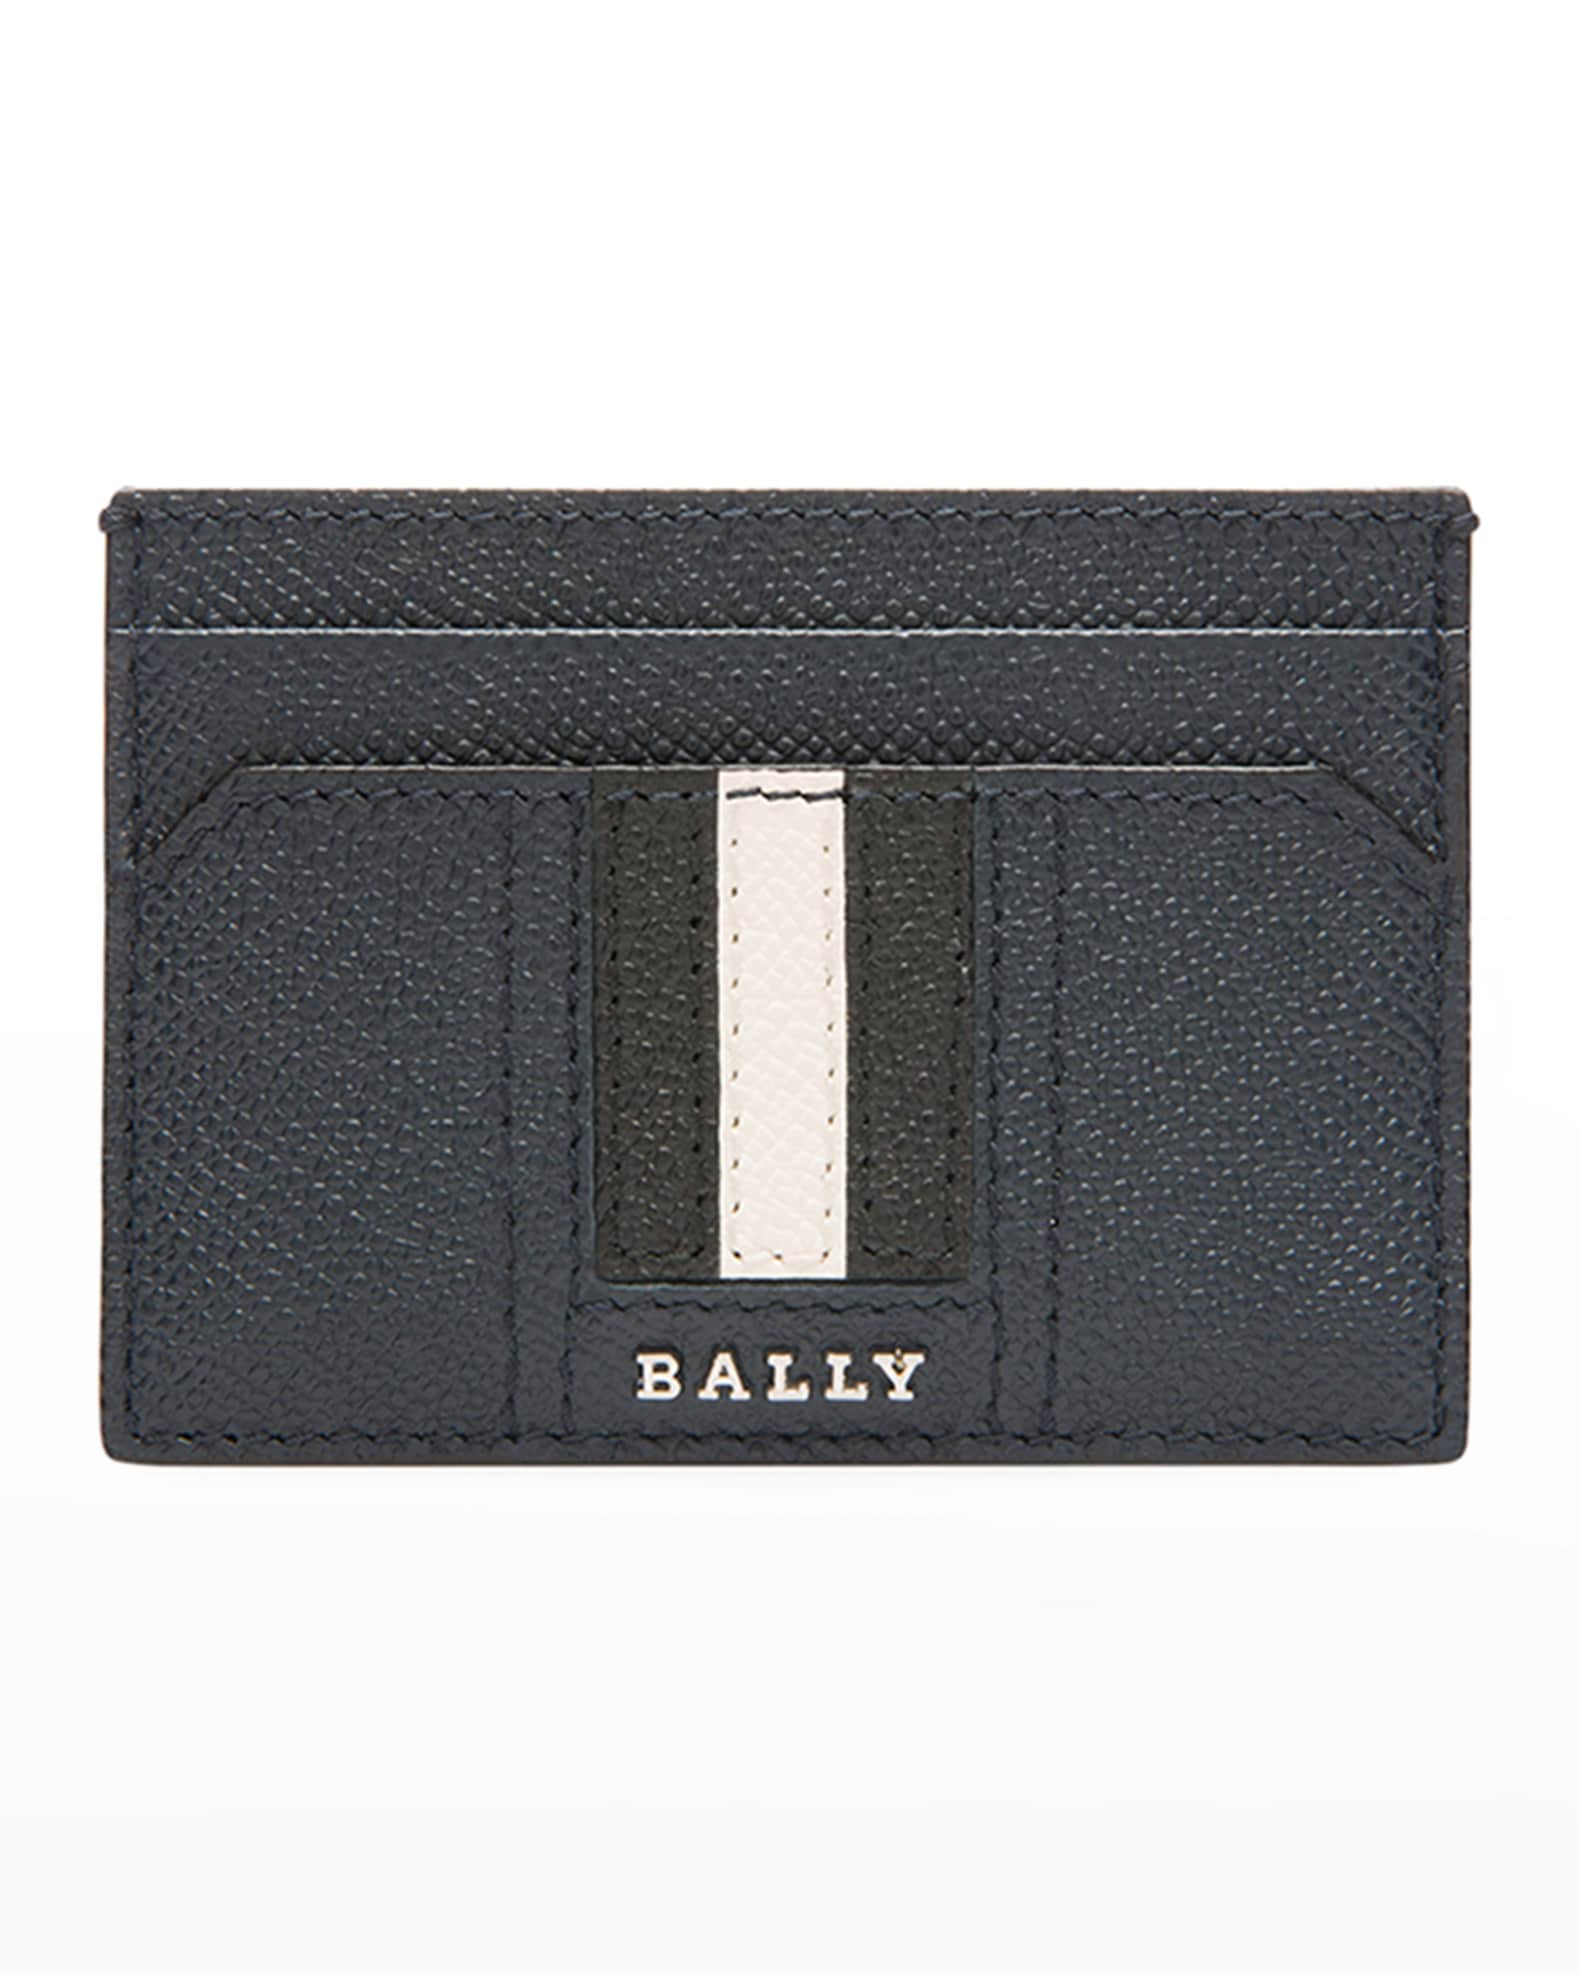 Bally Men's Trainspotting Leather Card Case | Neiman Marcus